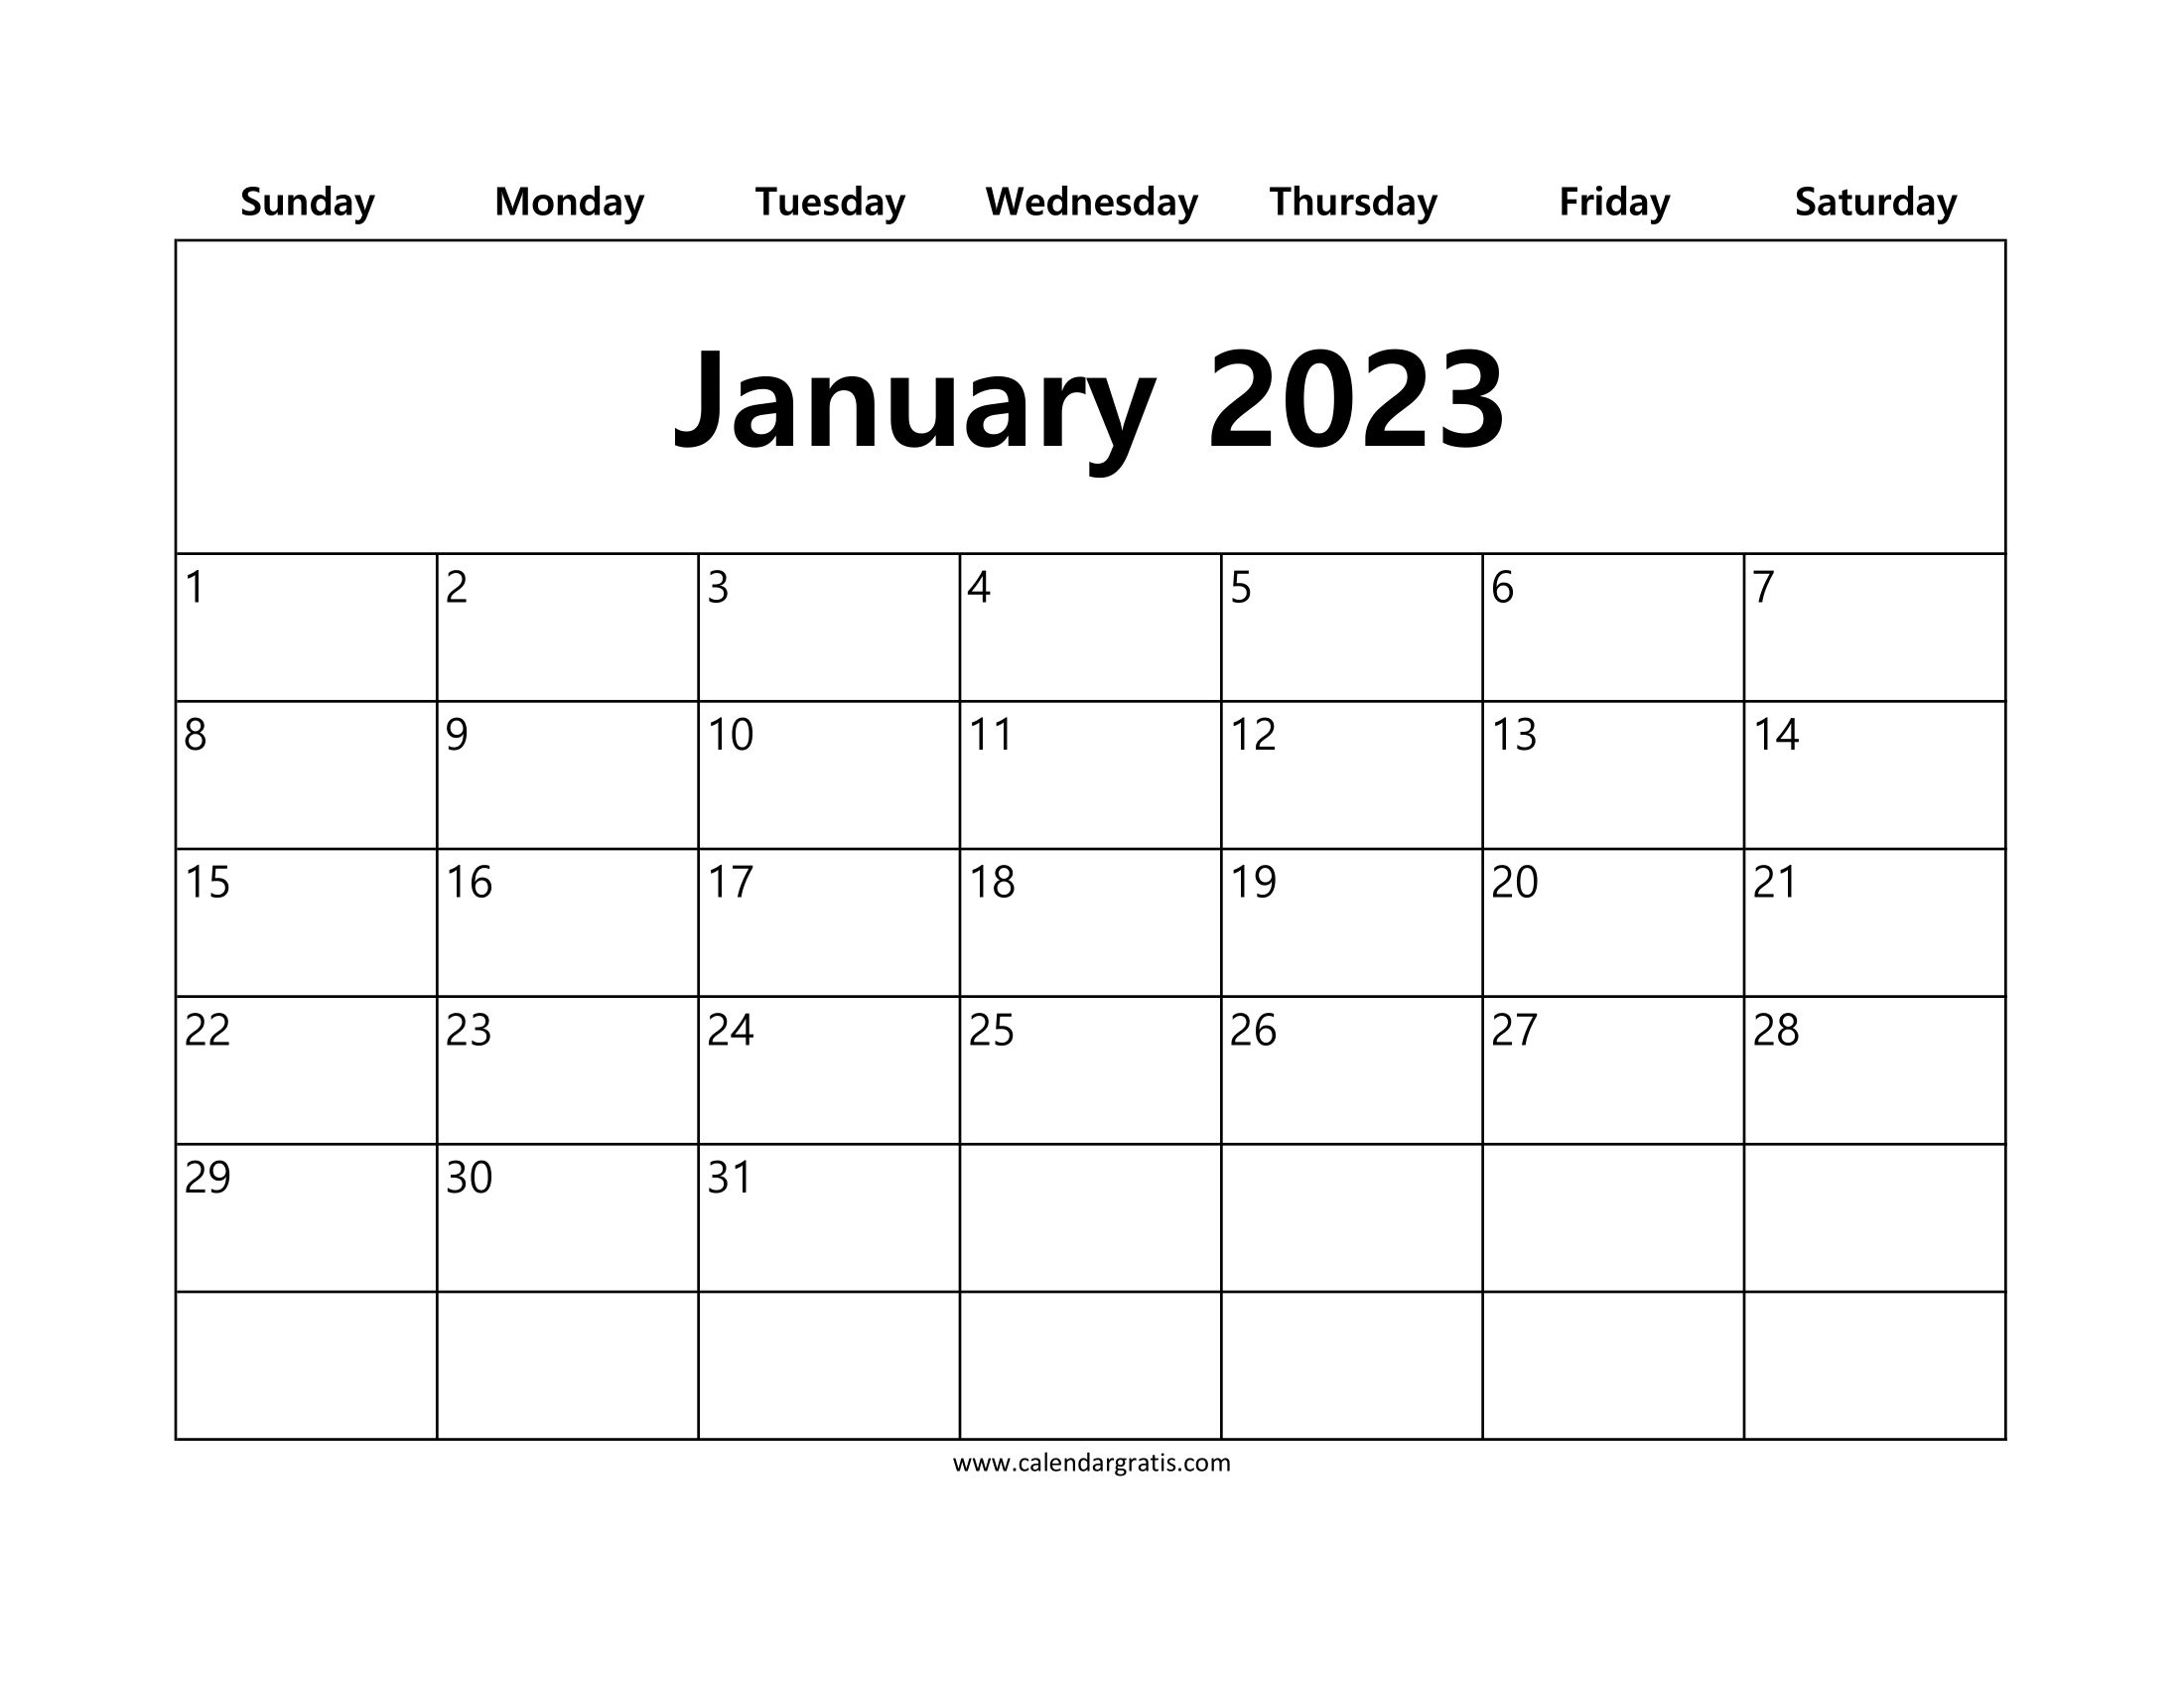 Free printable January 2023 calendar with simple white background layout.